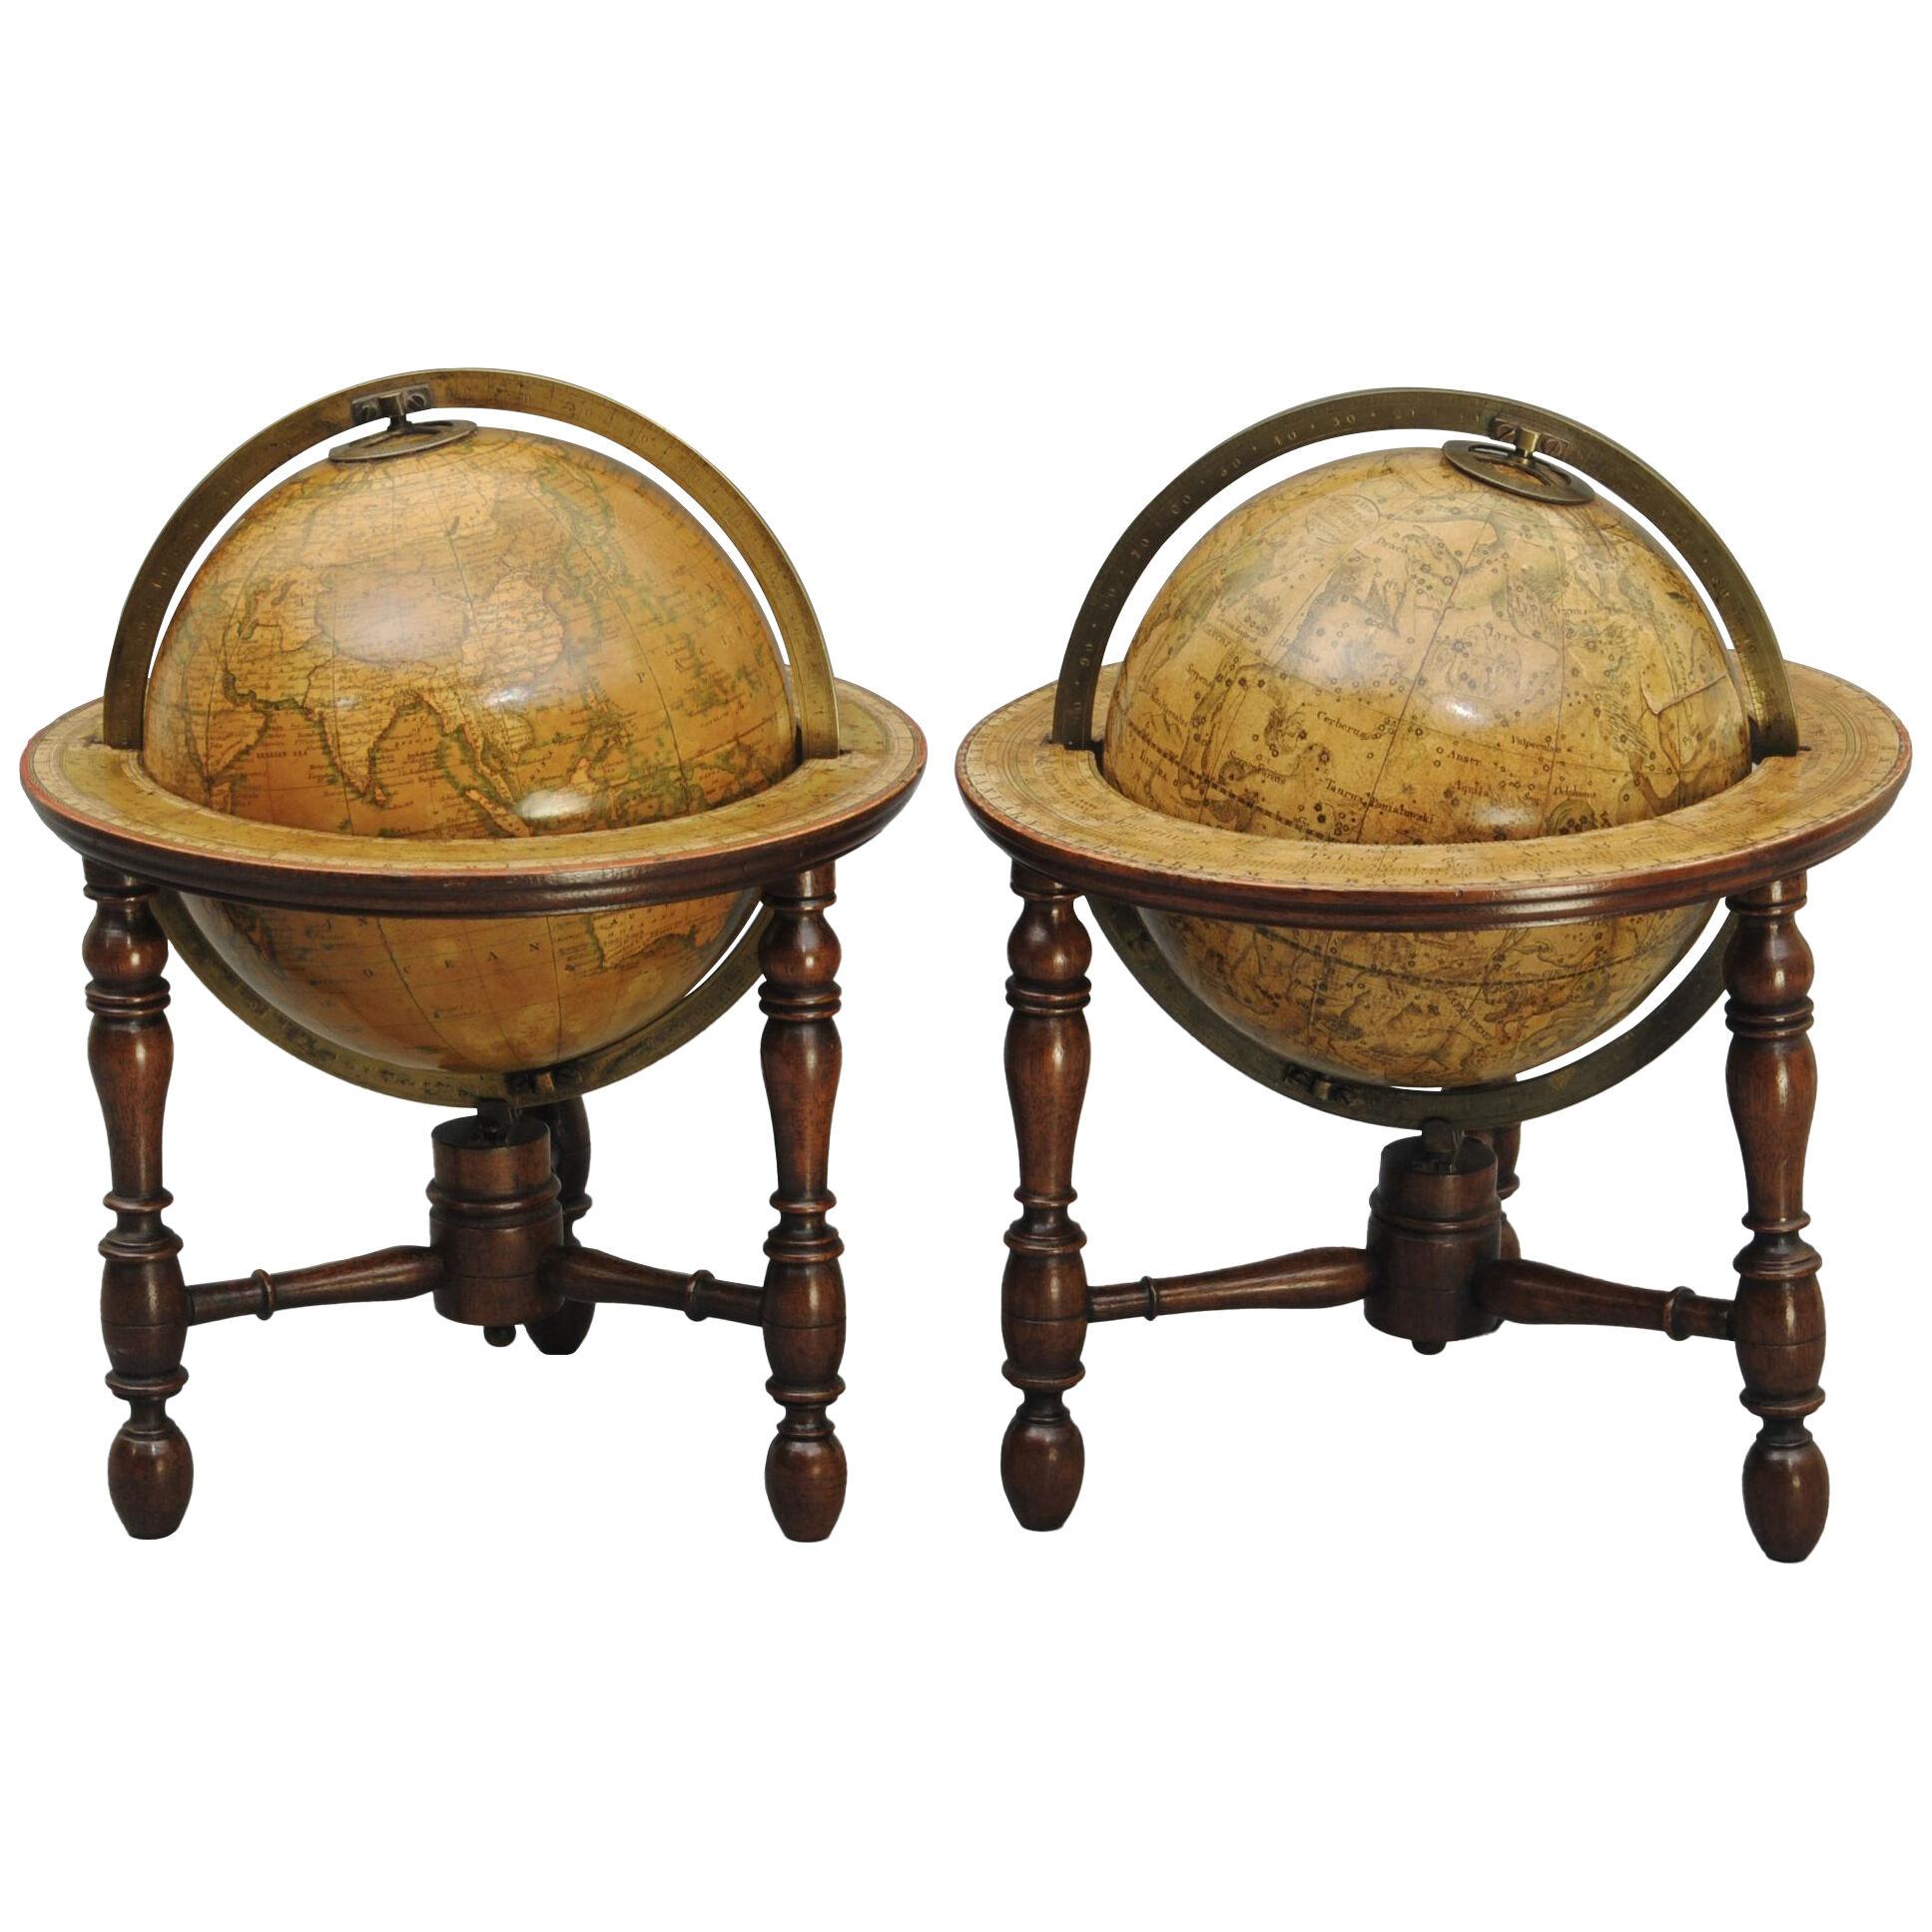 EARLY 19TH CENTURY PAIR OF 6”NEWTON TABLE GLOBES